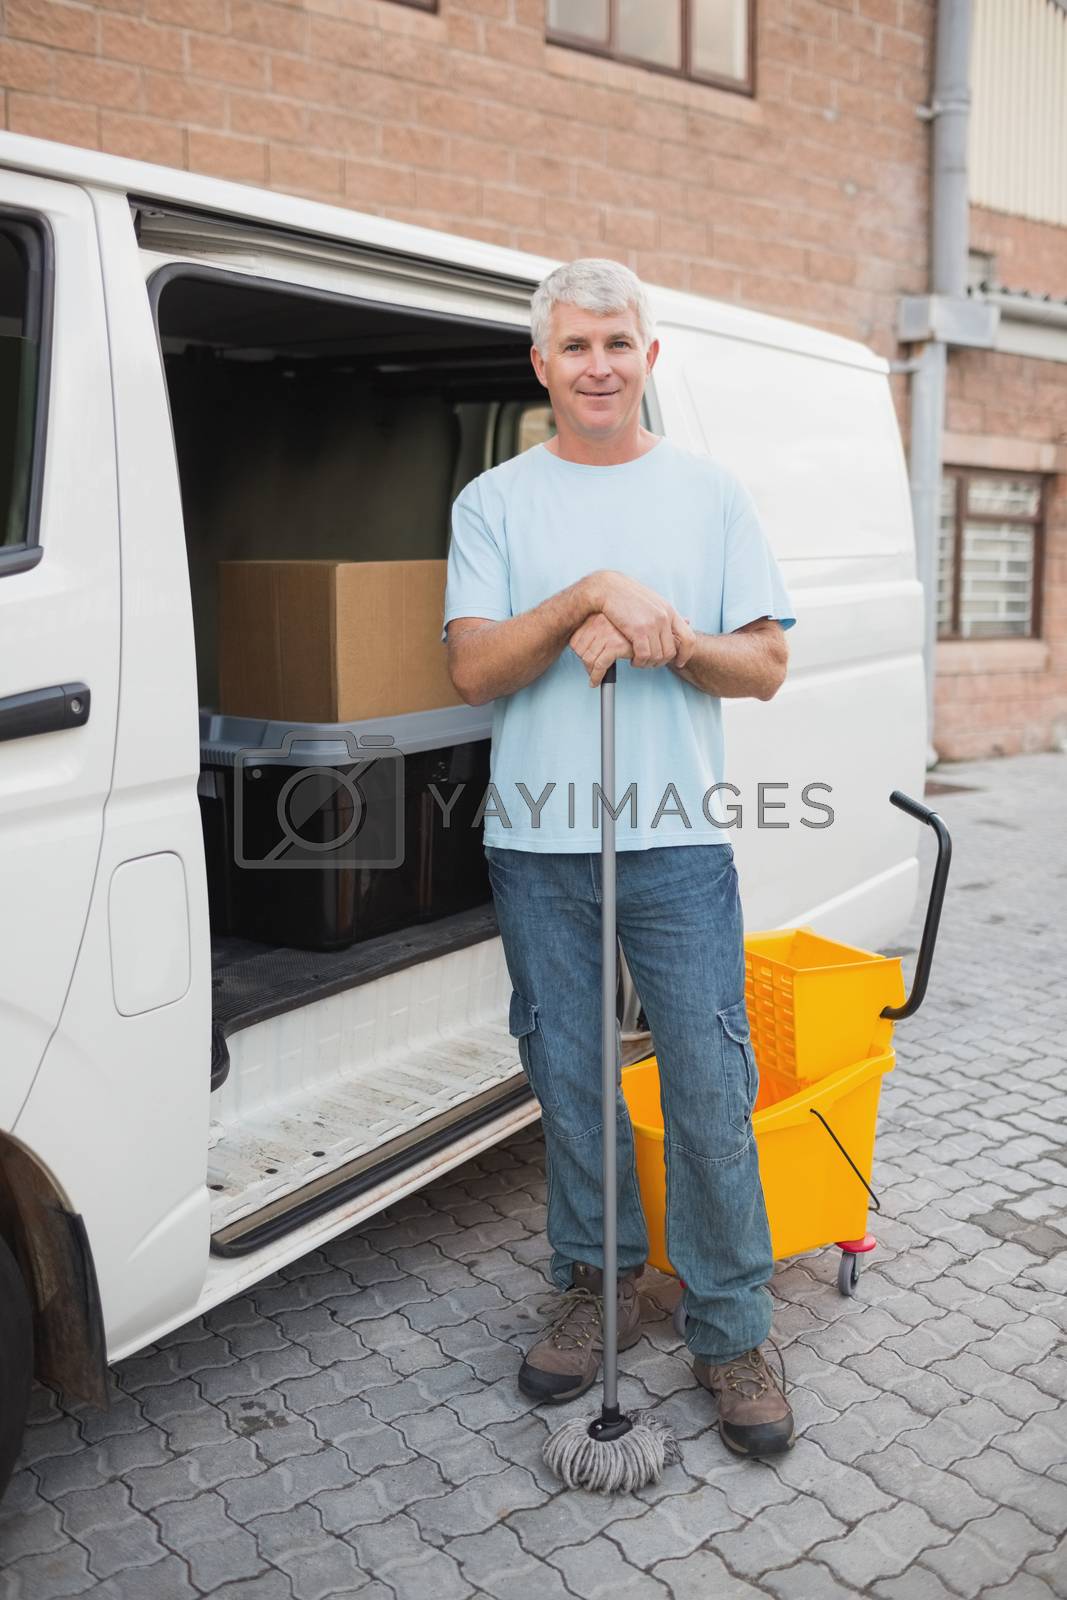 Royalty free image of Janitor by vehicle in front of warehouse by Wavebreakmedia